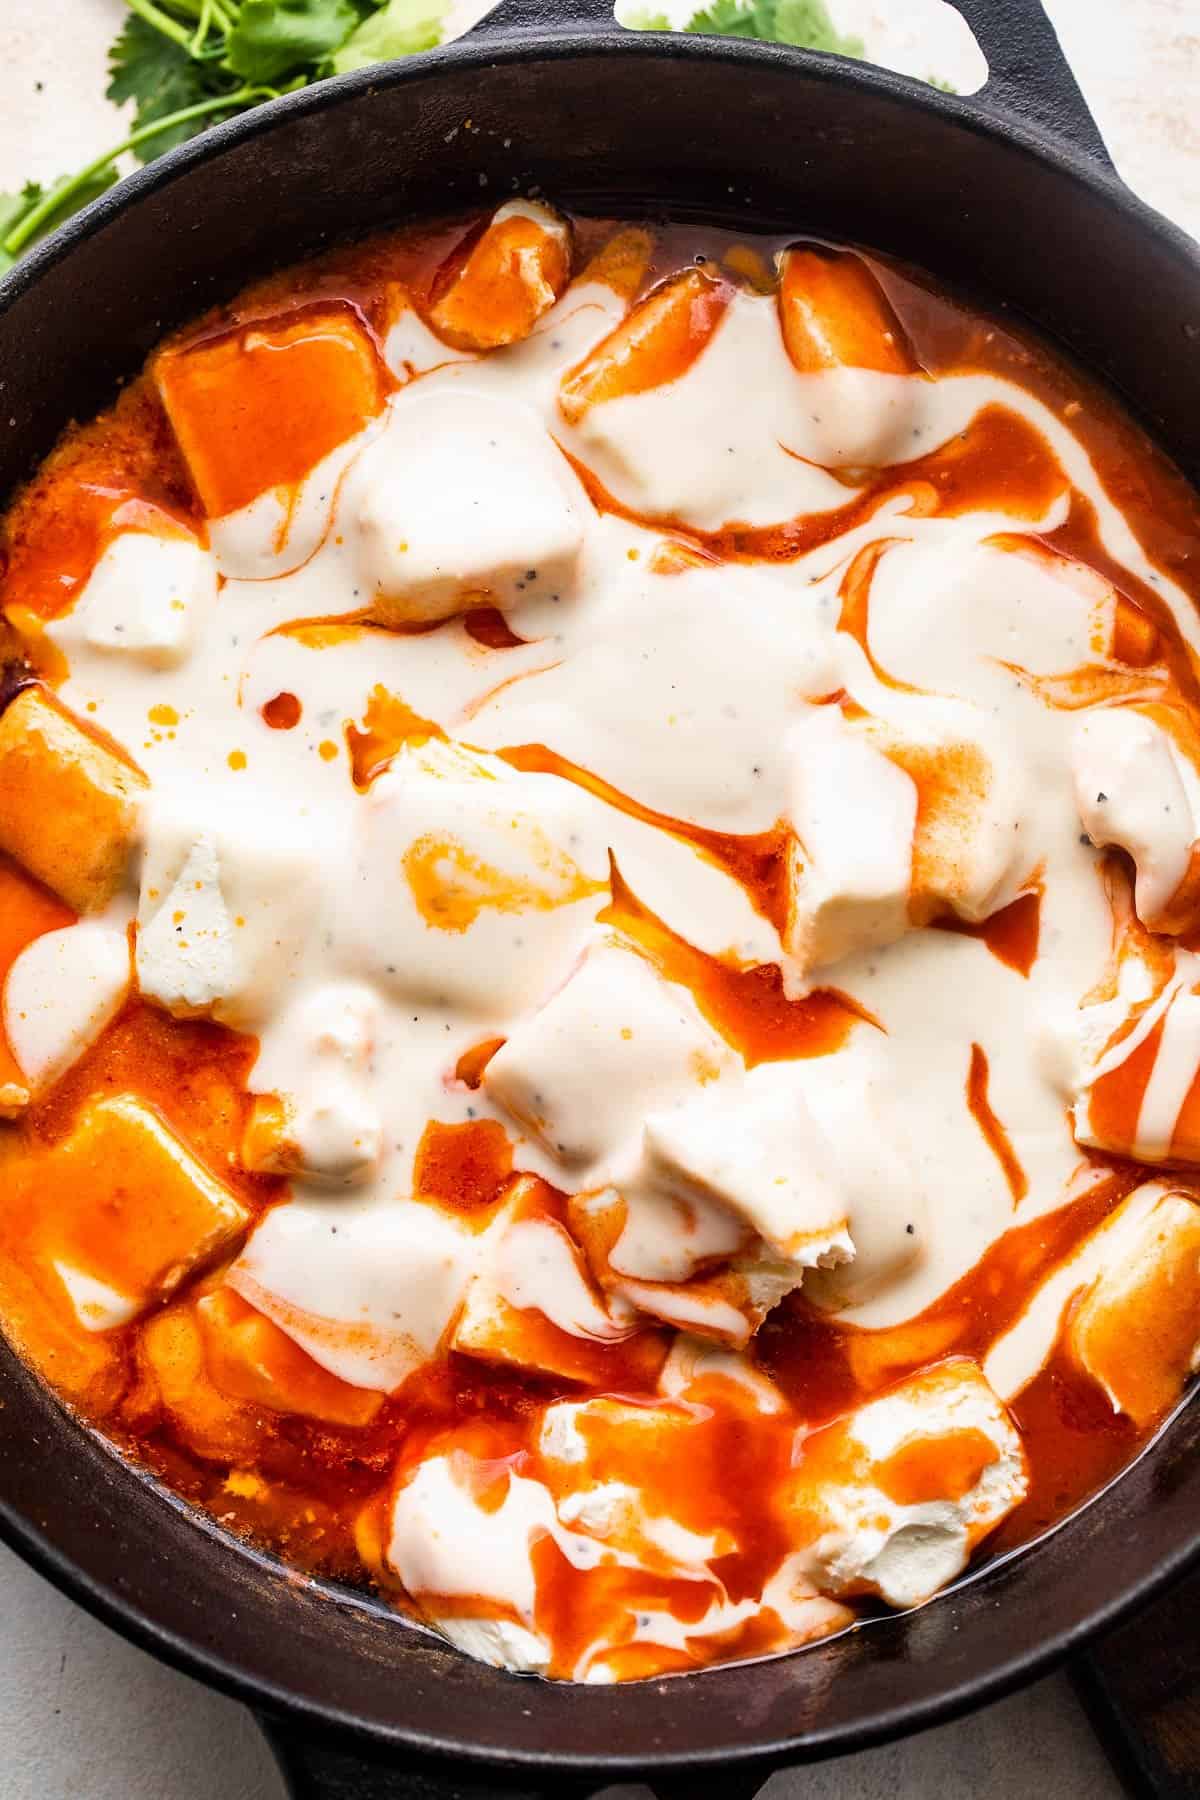 cubed cream cheese, hot buffalo sauce, and ranch dressing cooking in a cast iron skillet